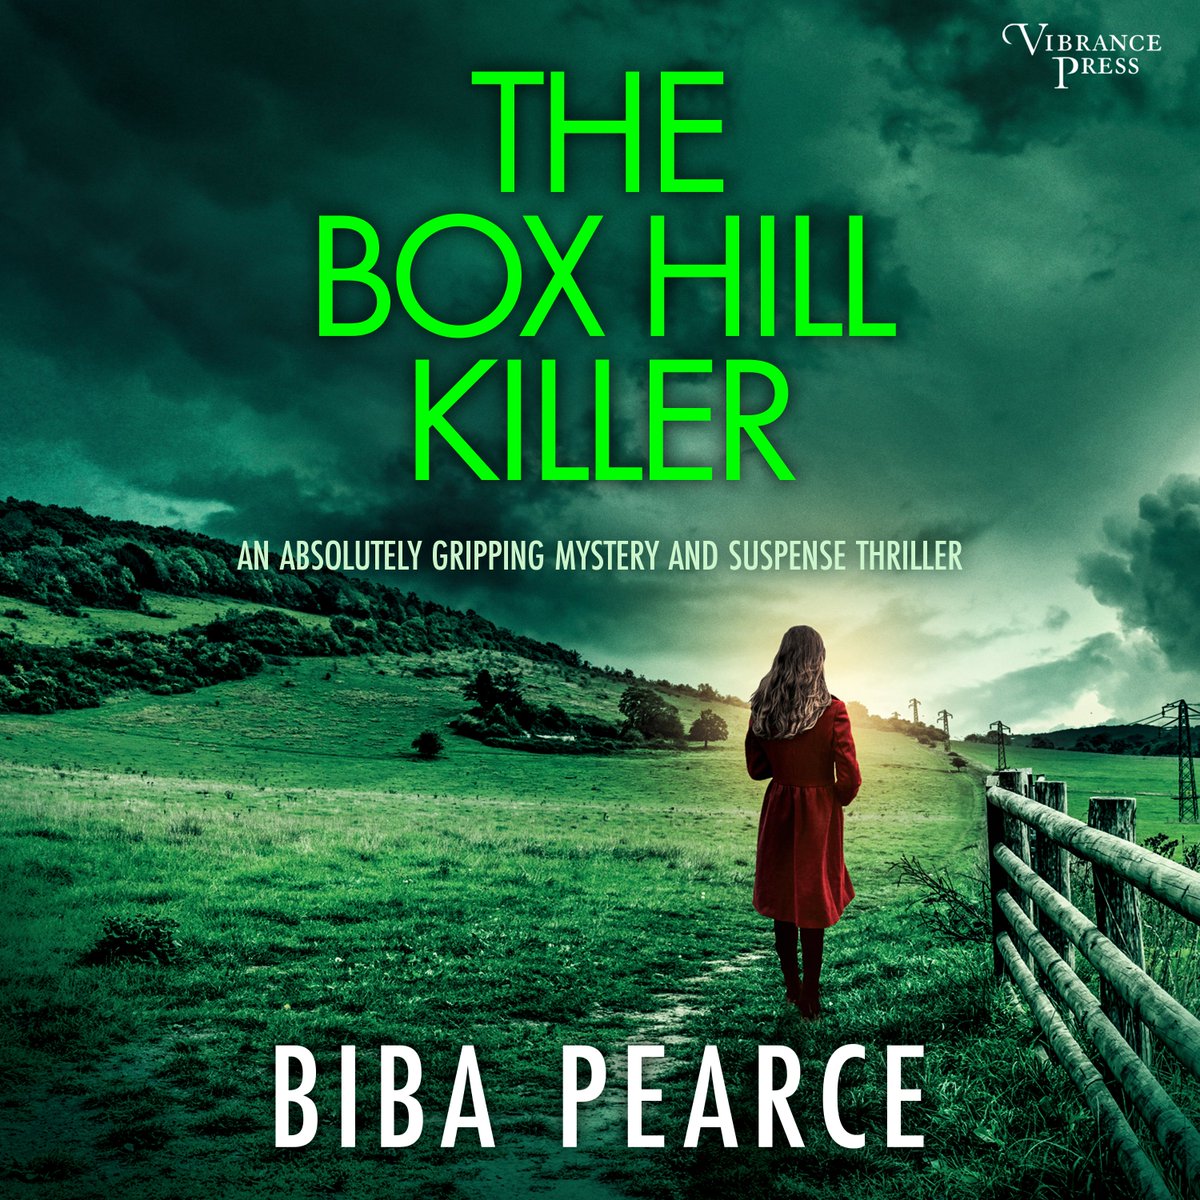 12 years ago Noah Palmer went for a bike ride and never came home. He was found in the Box Hill woods, a victim of a serial killer

Join Detective Rob Miller to catch THE BOX HILL KILLER, by @BibaPearce narrated by Nathaniel Priestley.

Wherever audiobooks are sold.